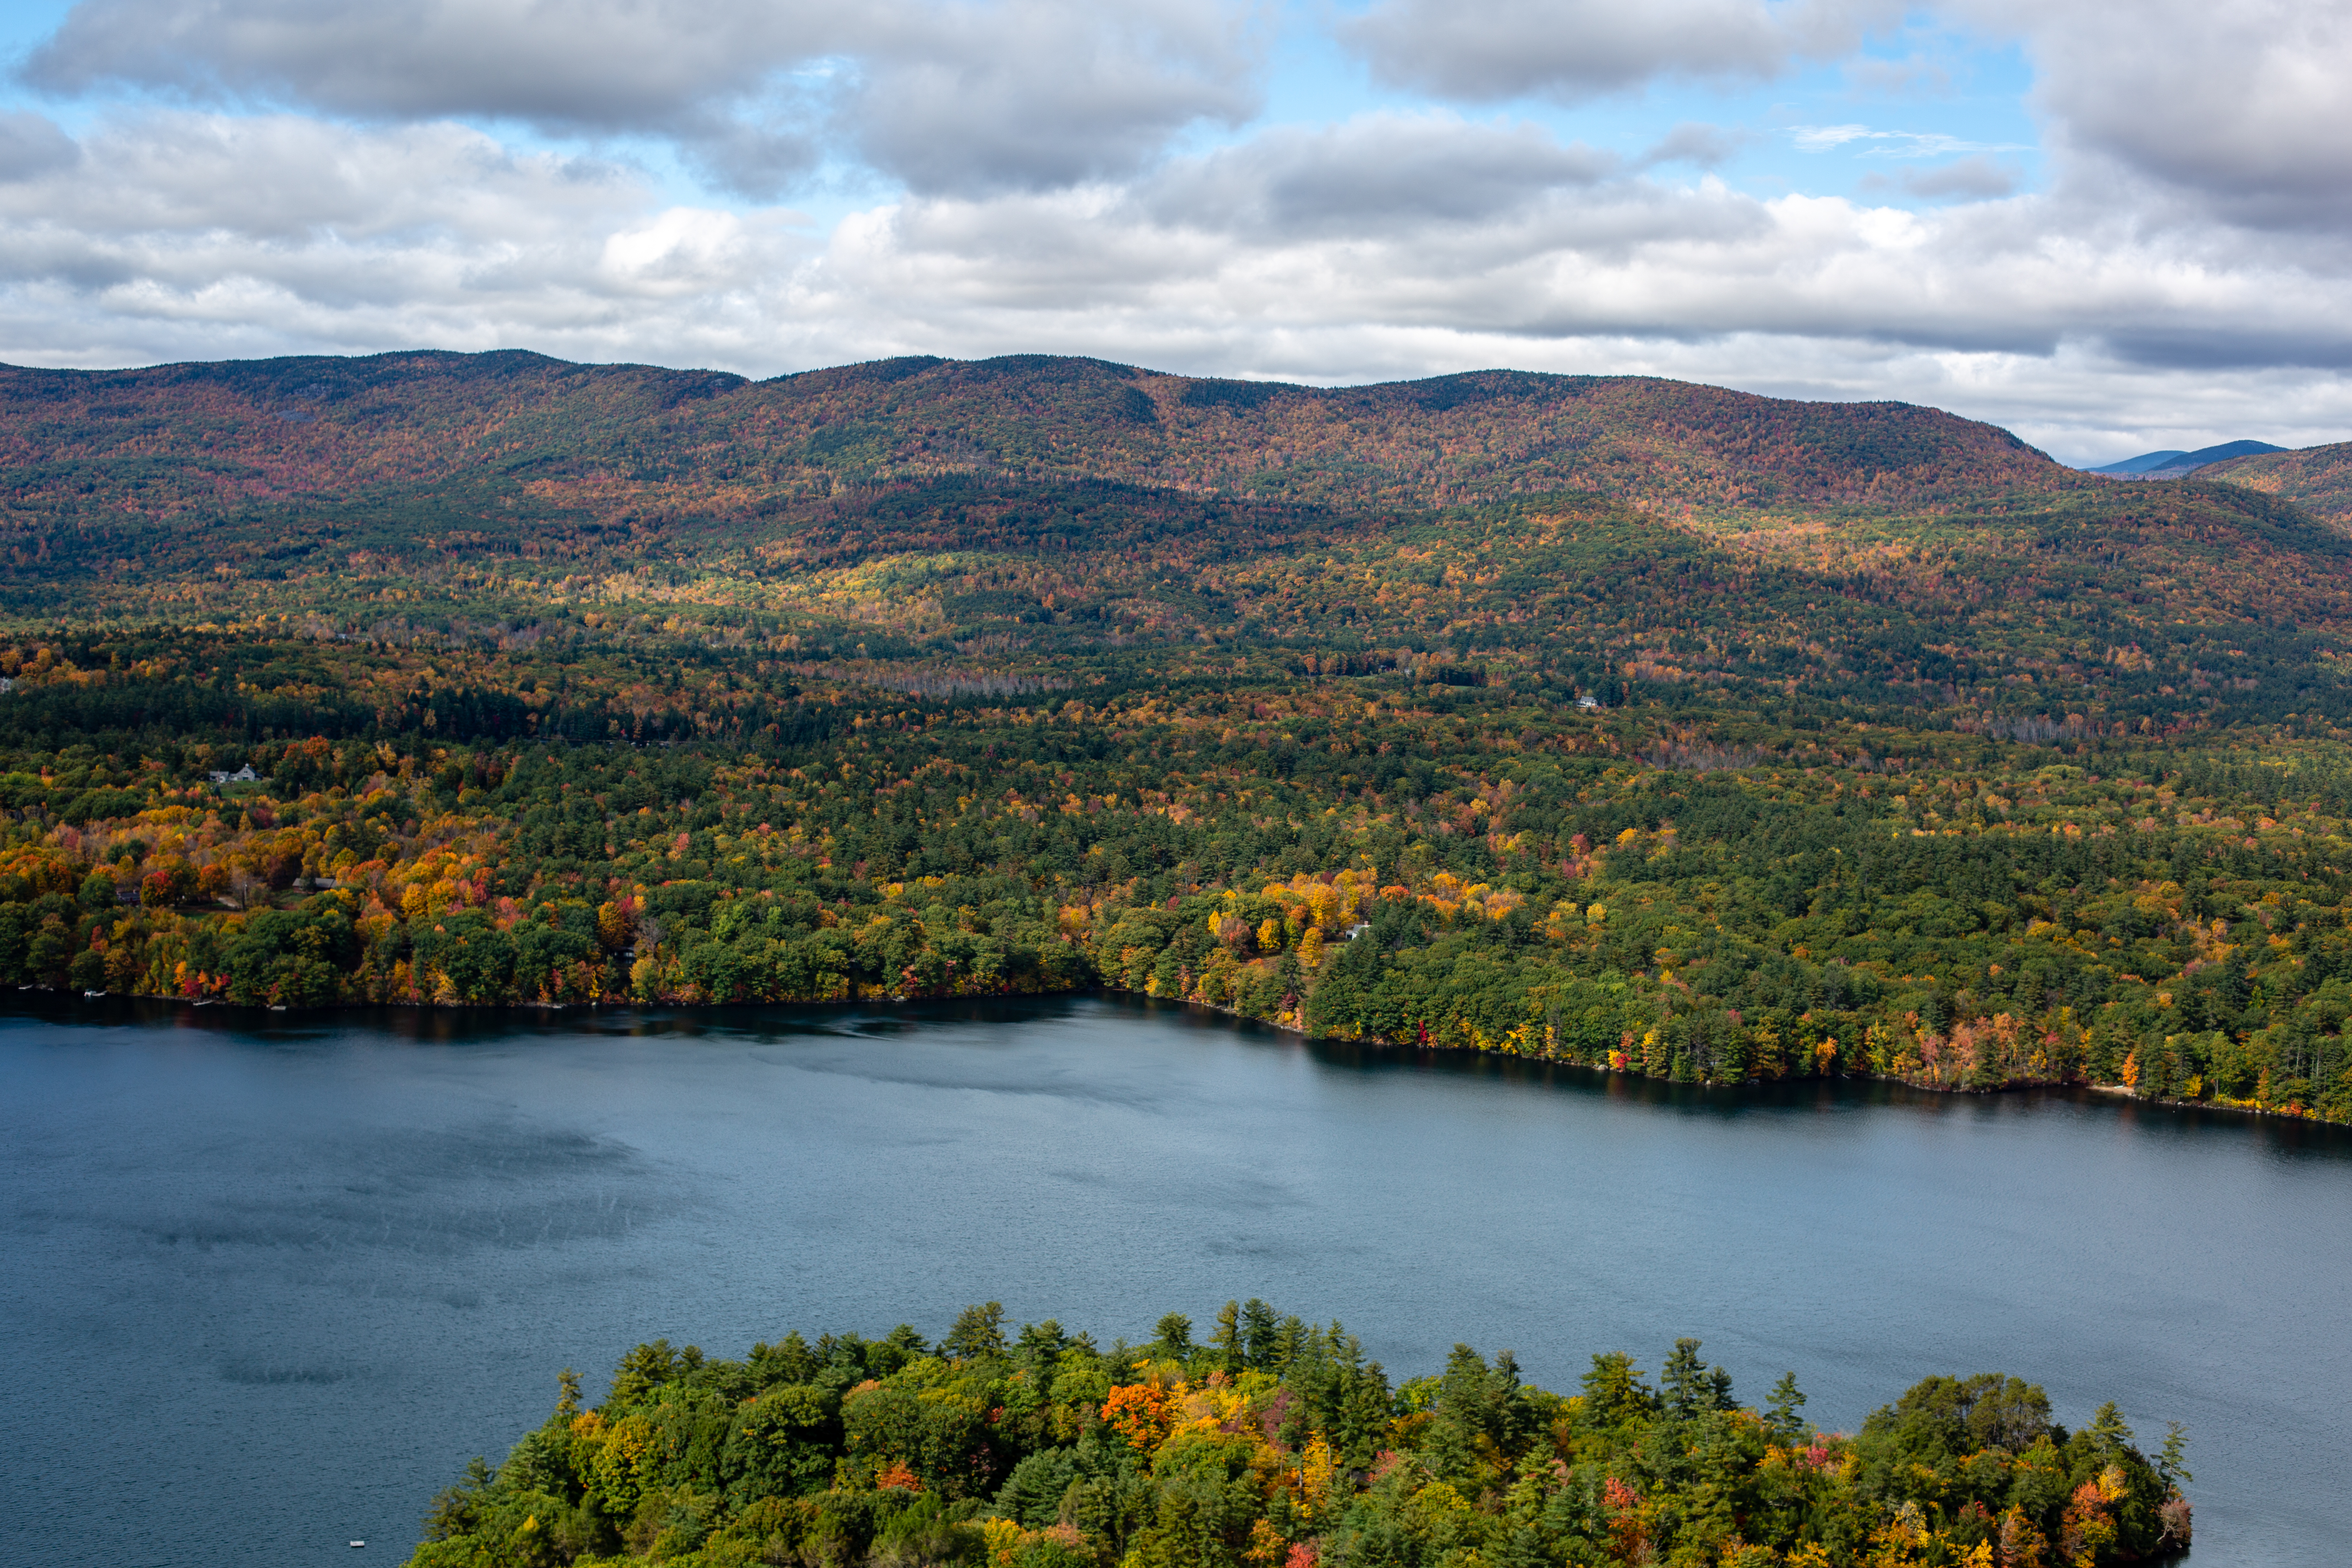 A view from Eagle Cliff of autumn foliage among hills and mountains in the distance.